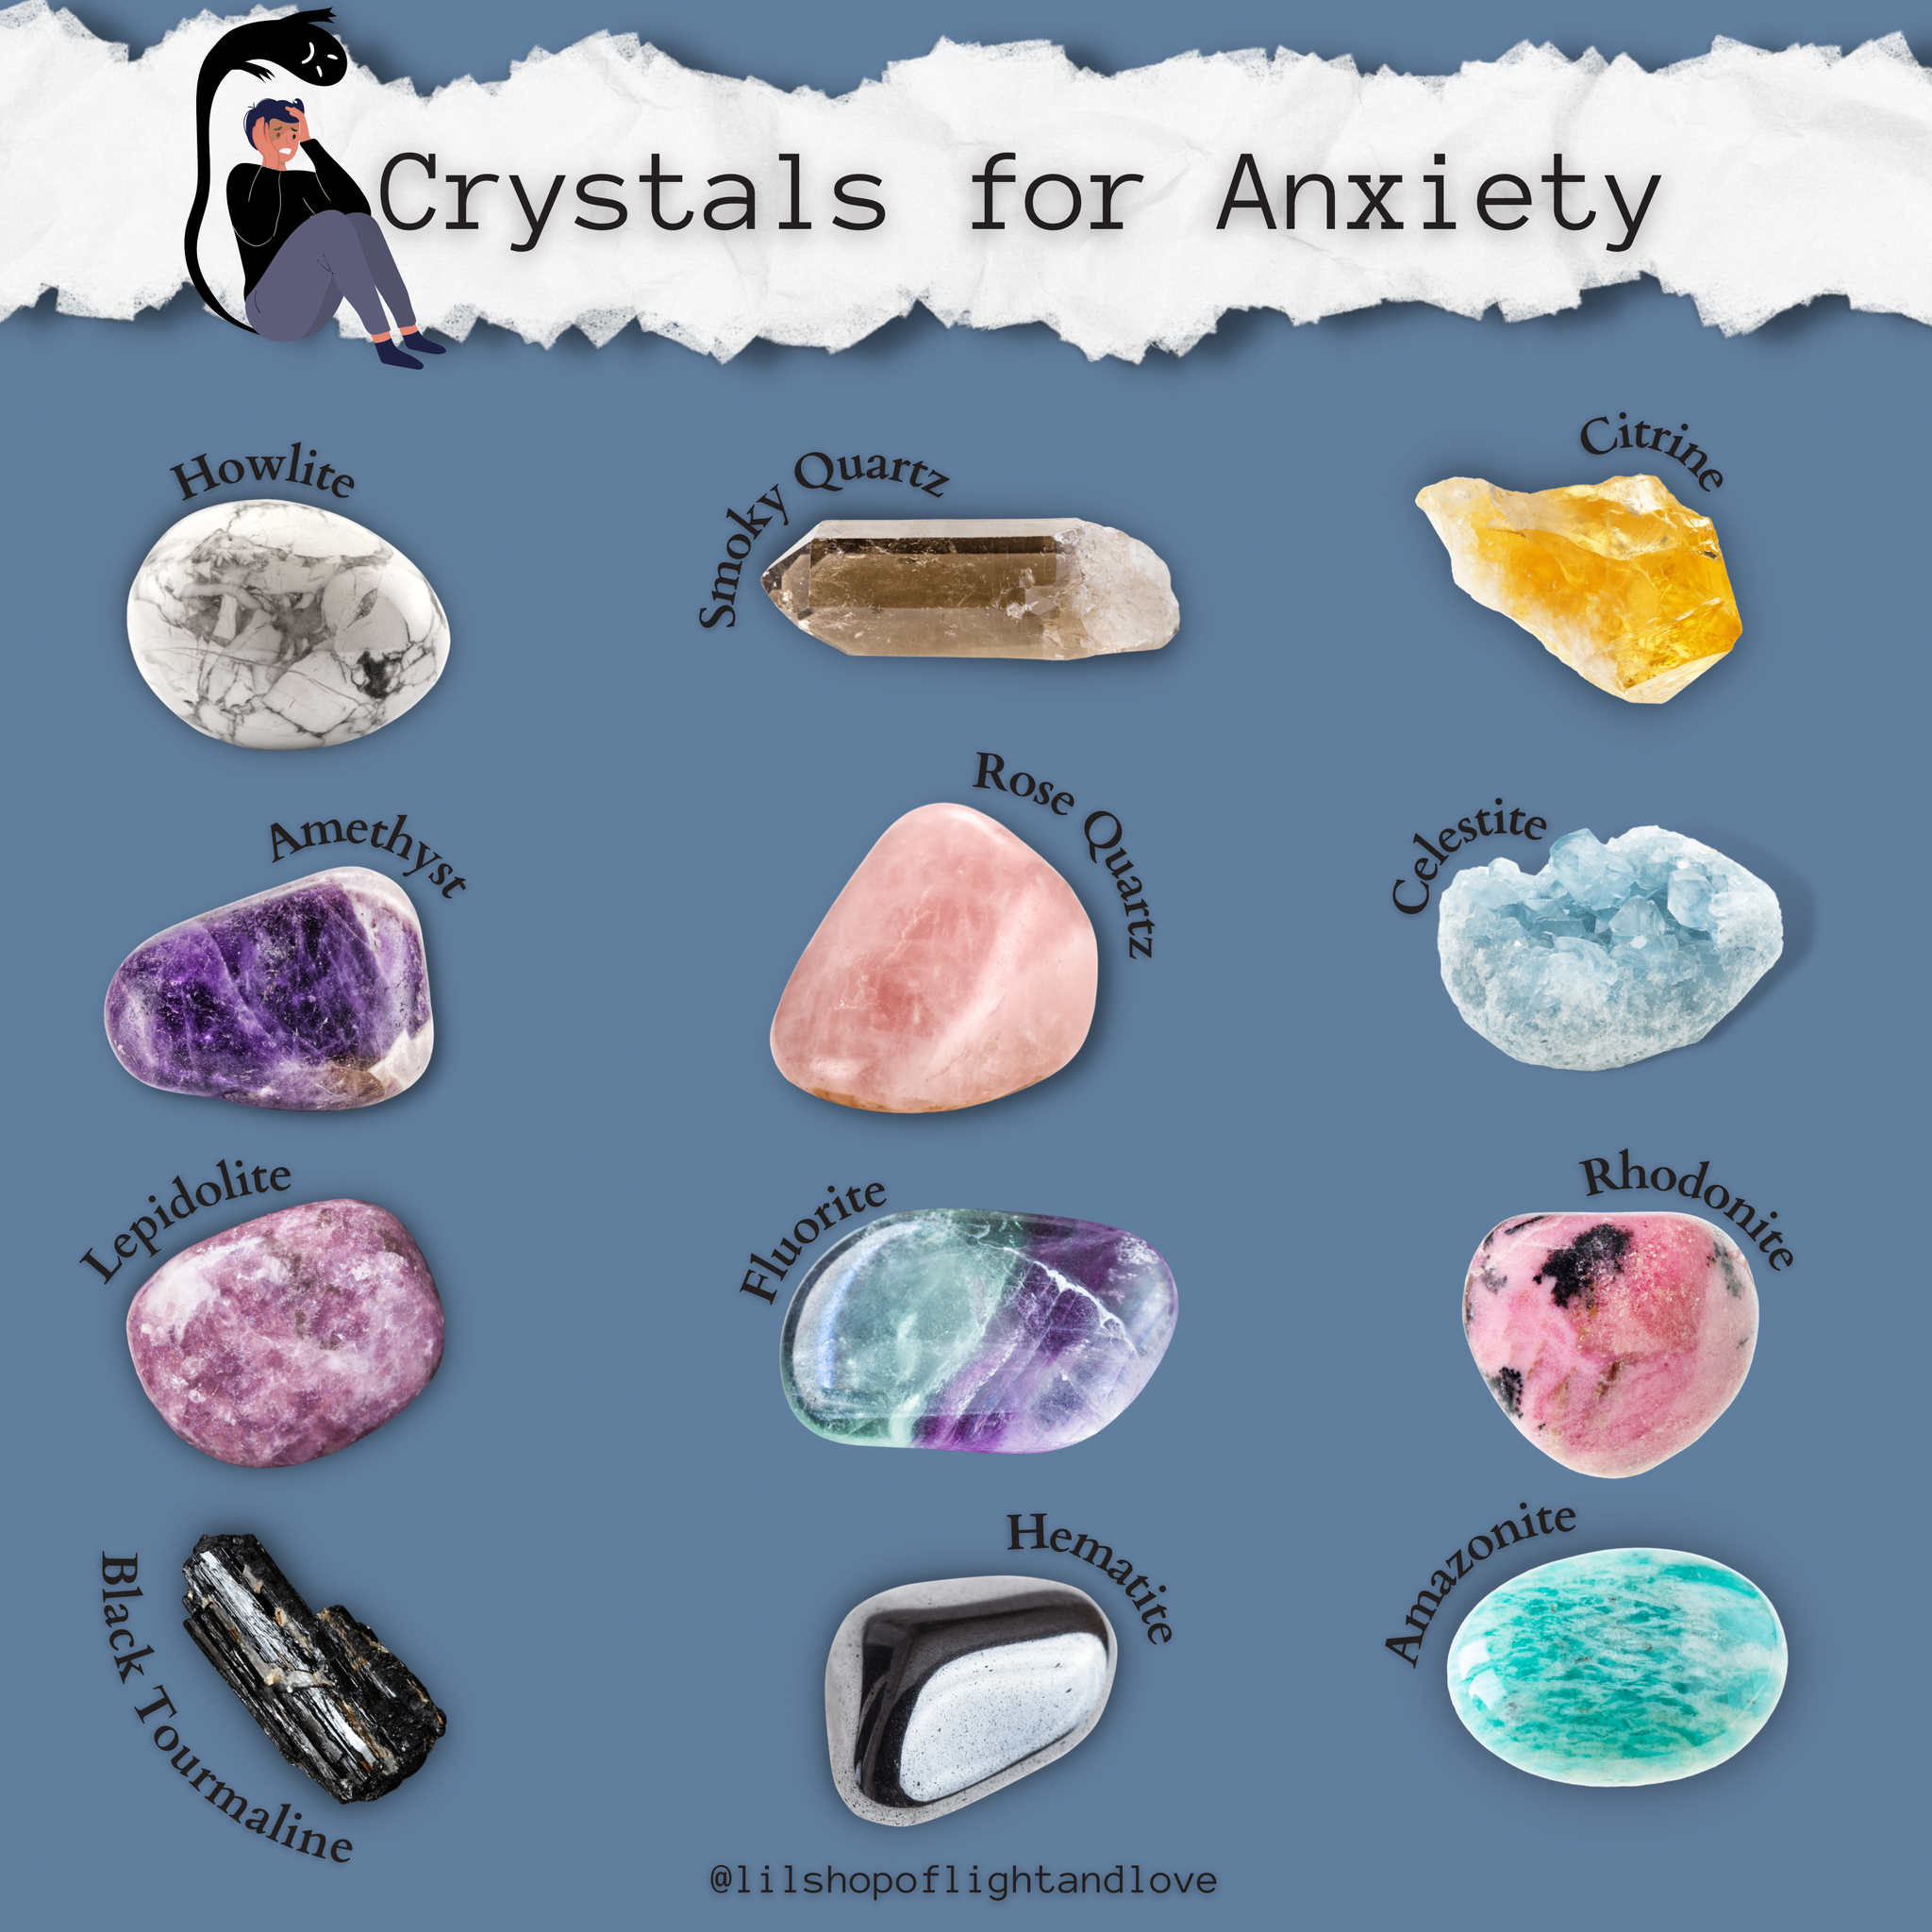 Crystals that help ease anxiety